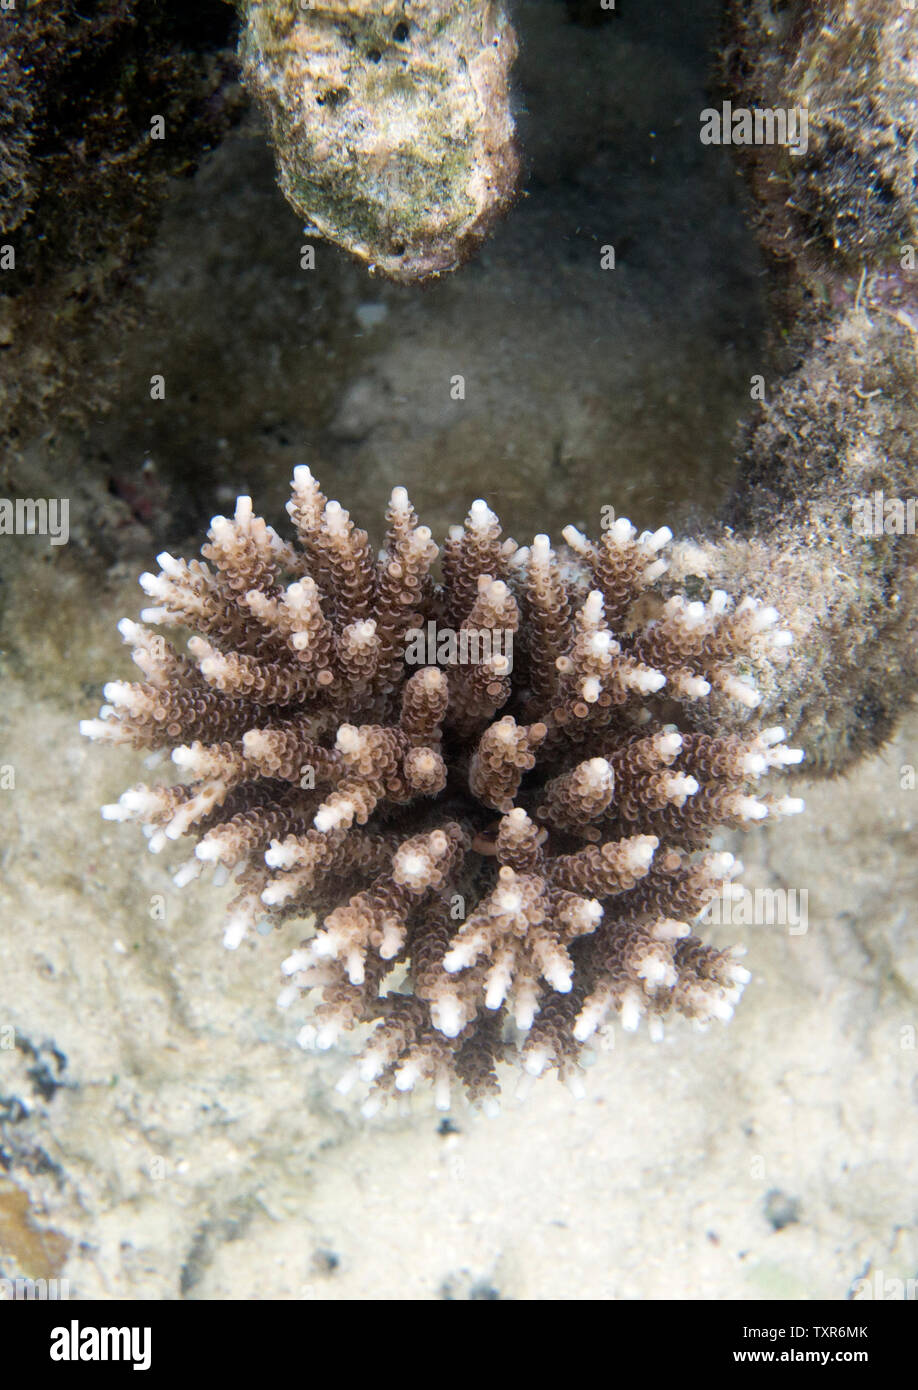 A growing coral in the sea of Togian islands, Indonesia Stock Photo